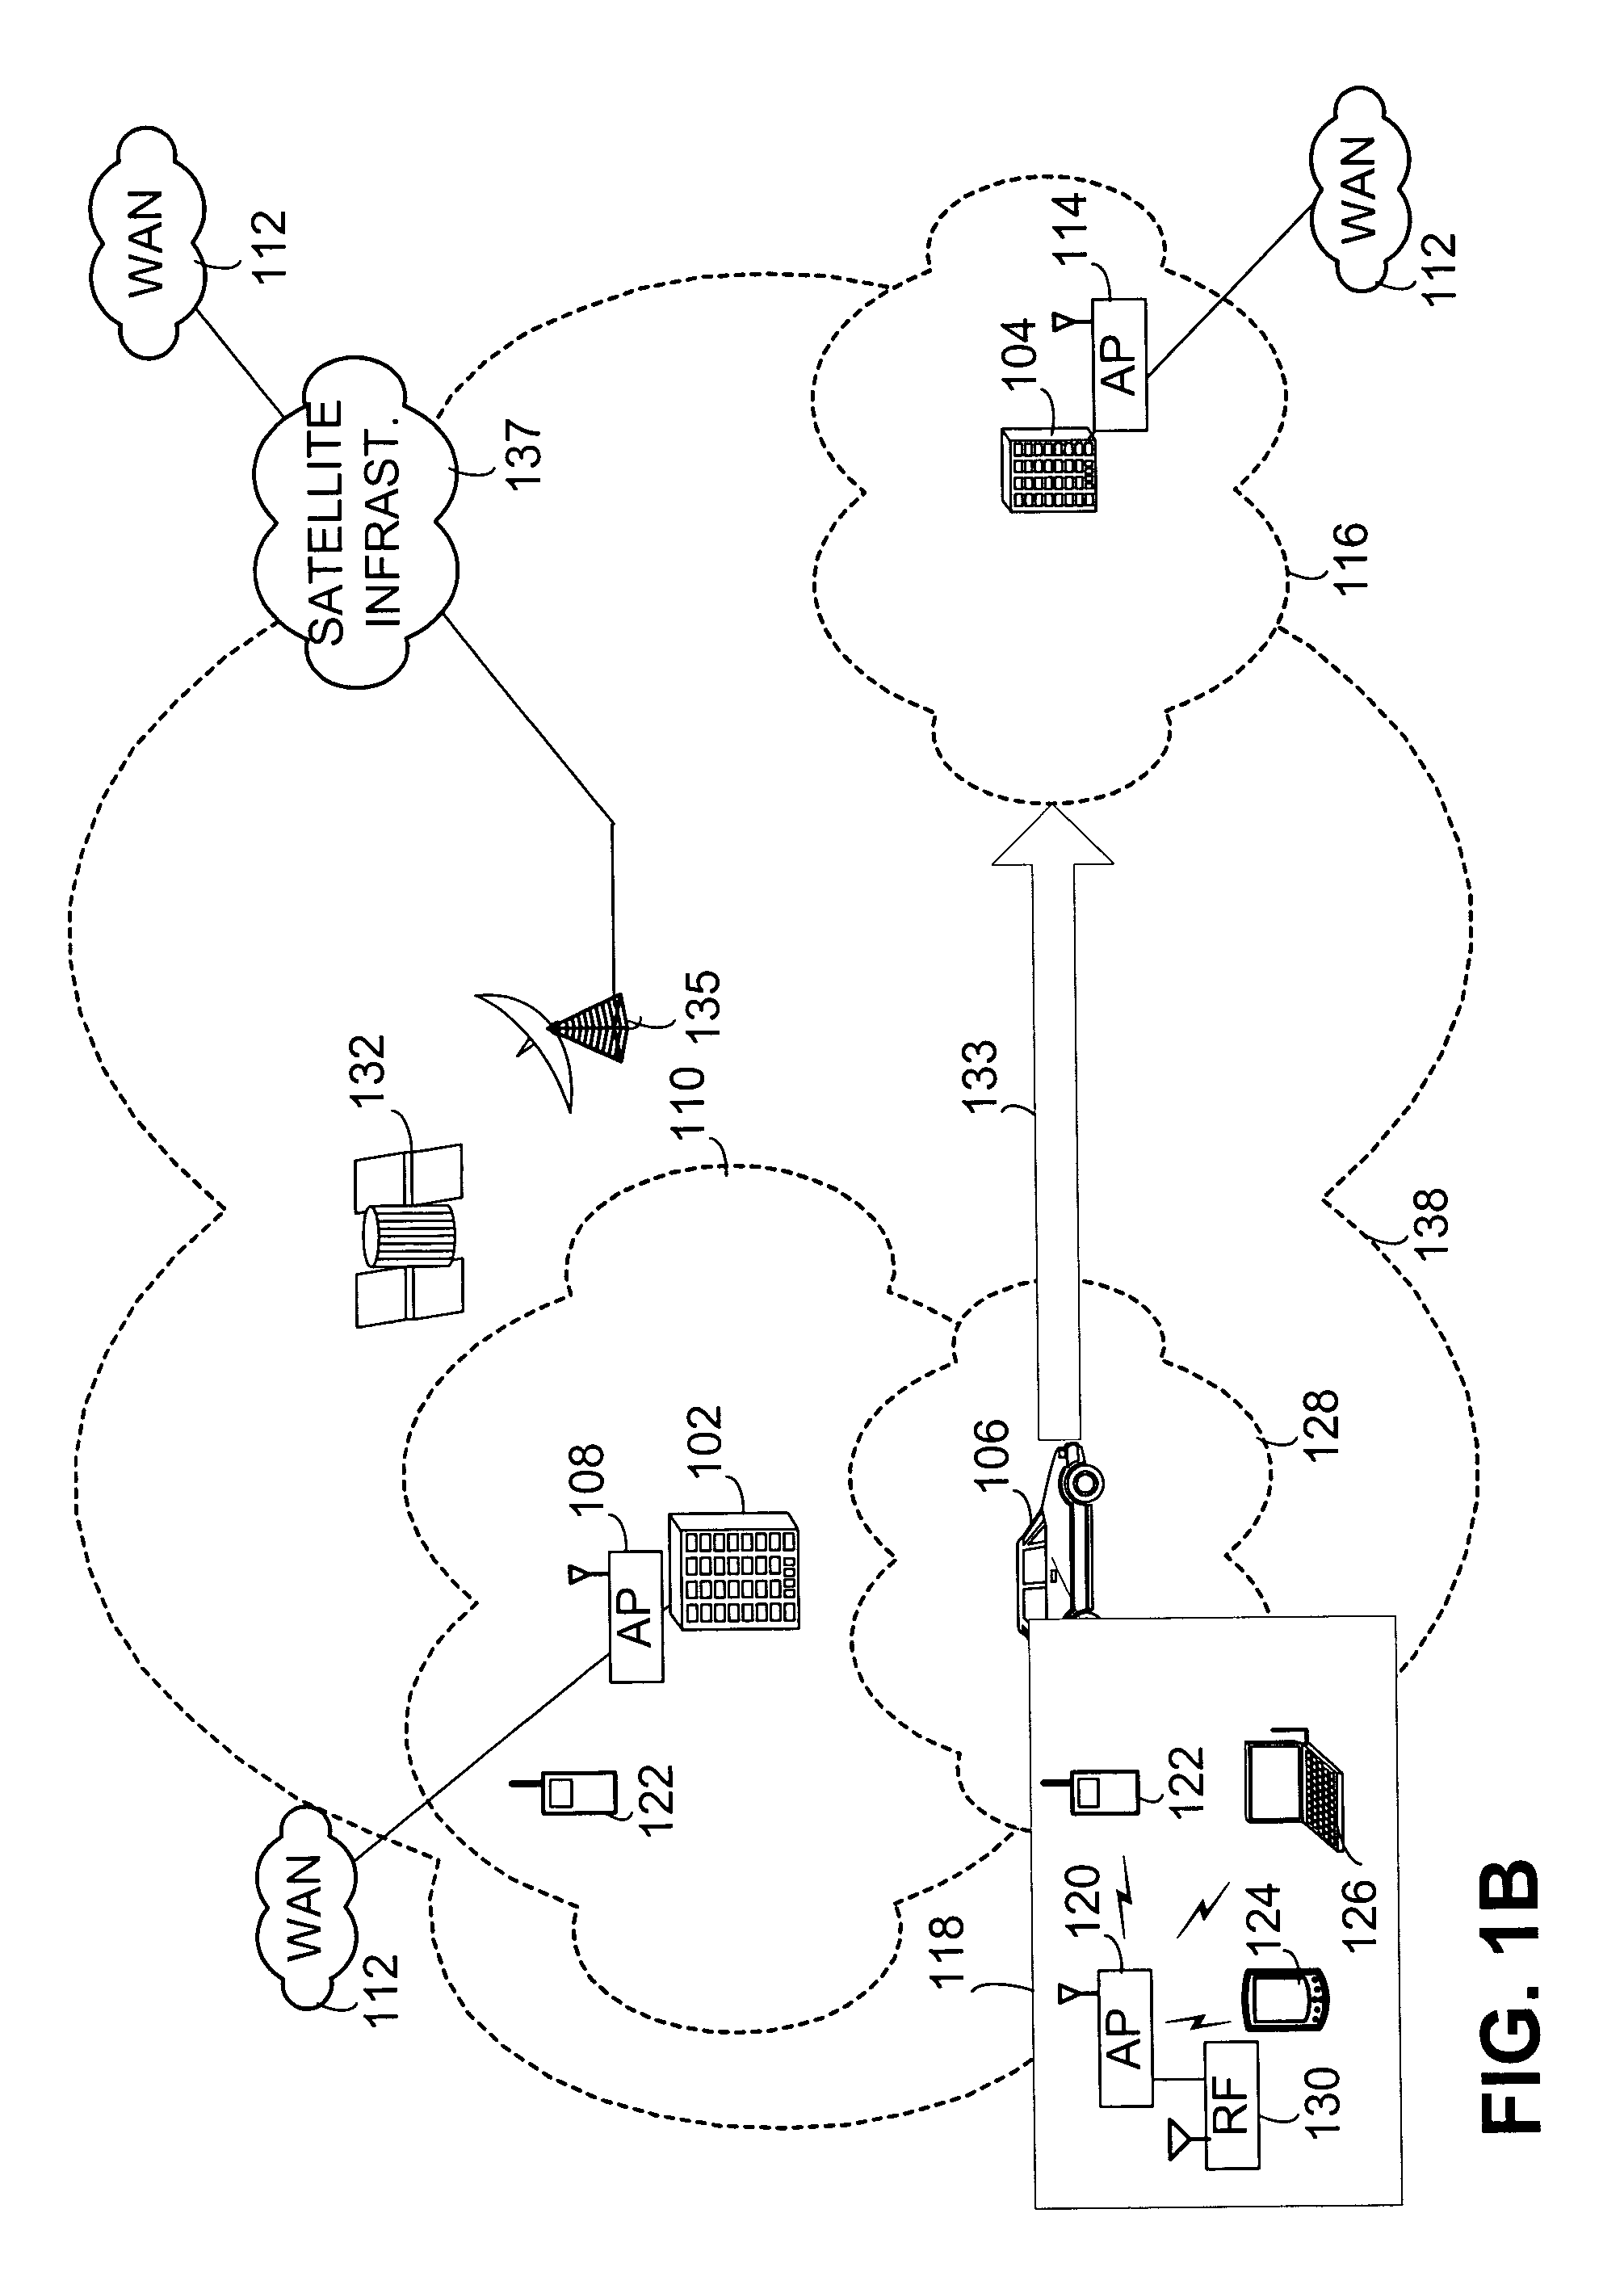 System and method for servicing communications using both fixed and mobile wirless networks